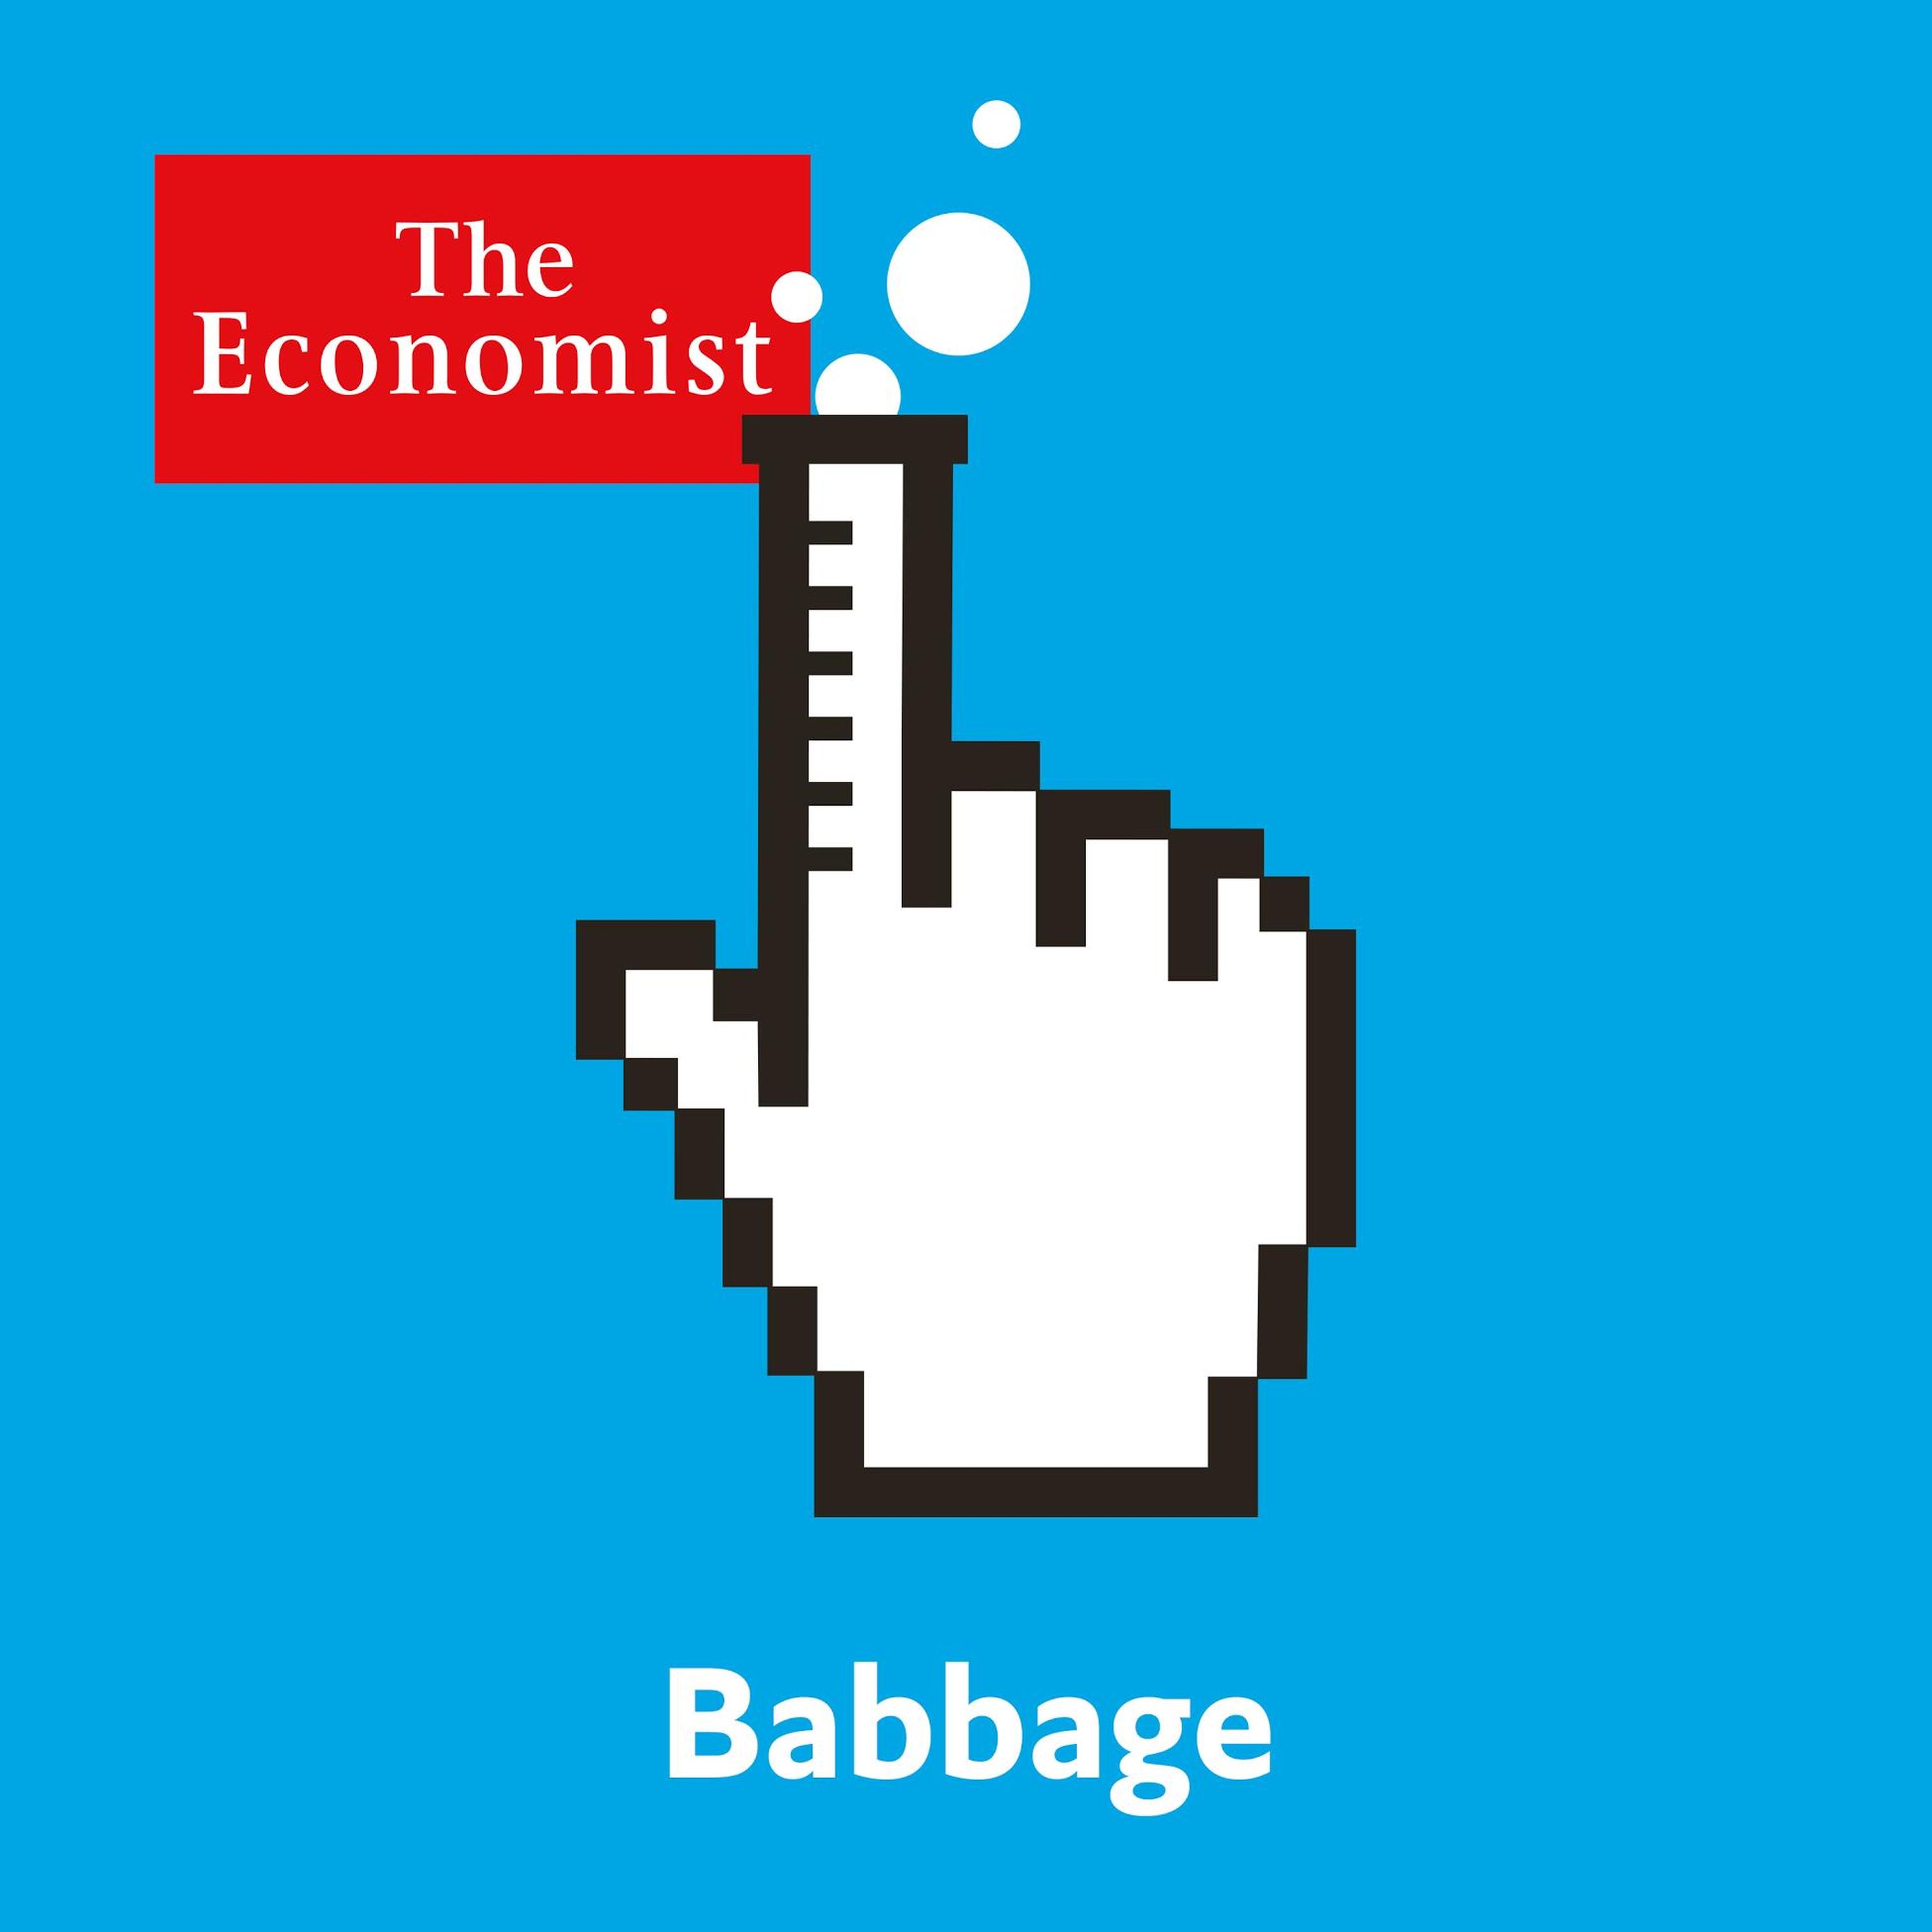 Babbage: The building blocks of life